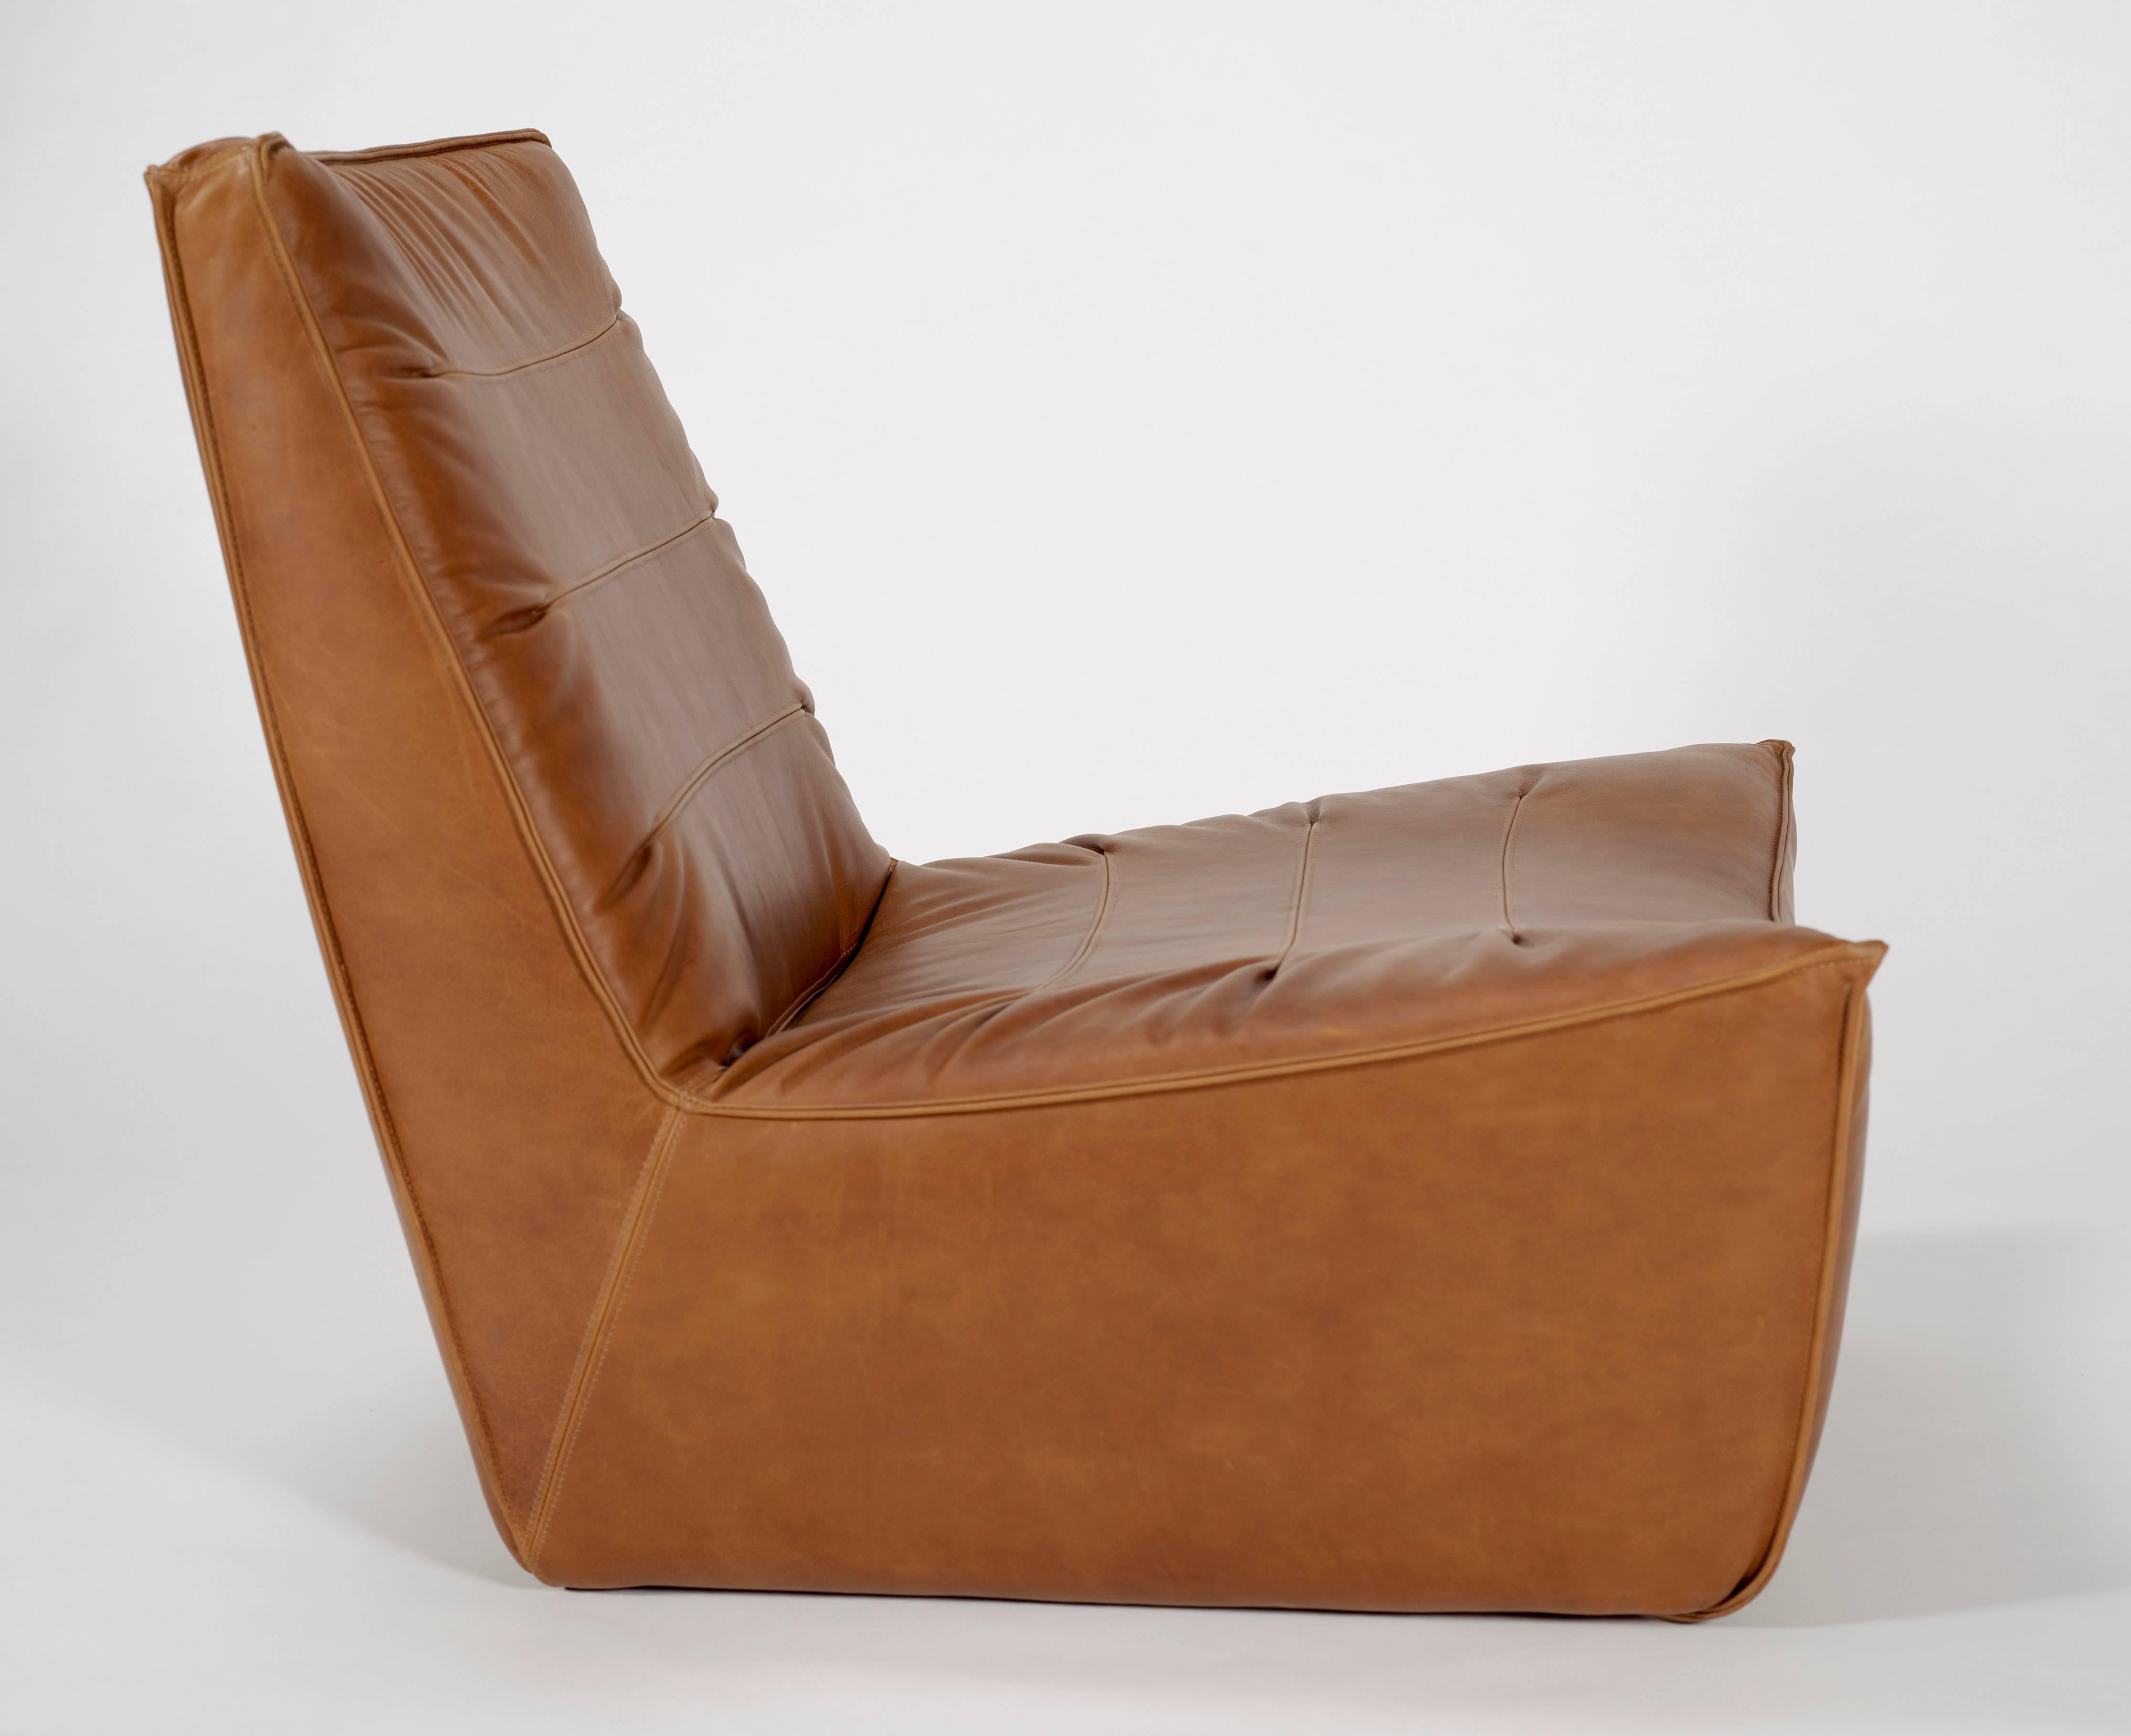 Our pinch chair is a fully upholstered chair in whiskey leather.

This comfy lounger take cues from the upholstery of 1970s Italian sports cars. The original was custom designed for a client in Los Angeles who wanted the perfect chair for listening